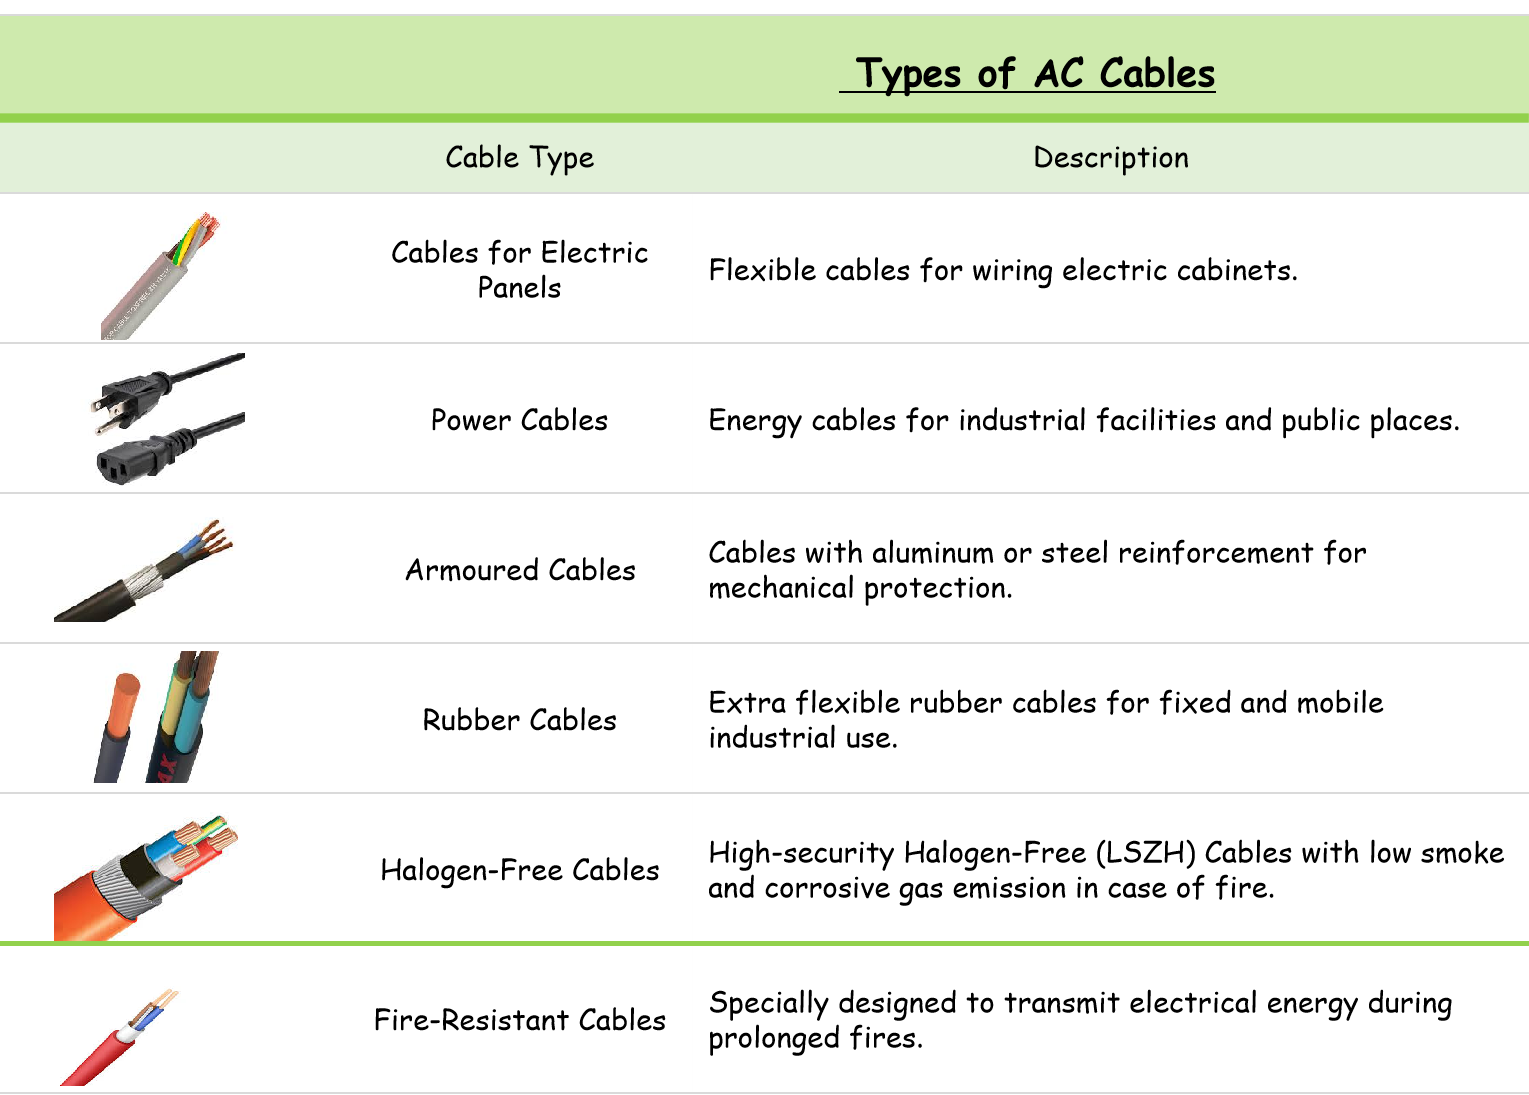 Types of AC cables